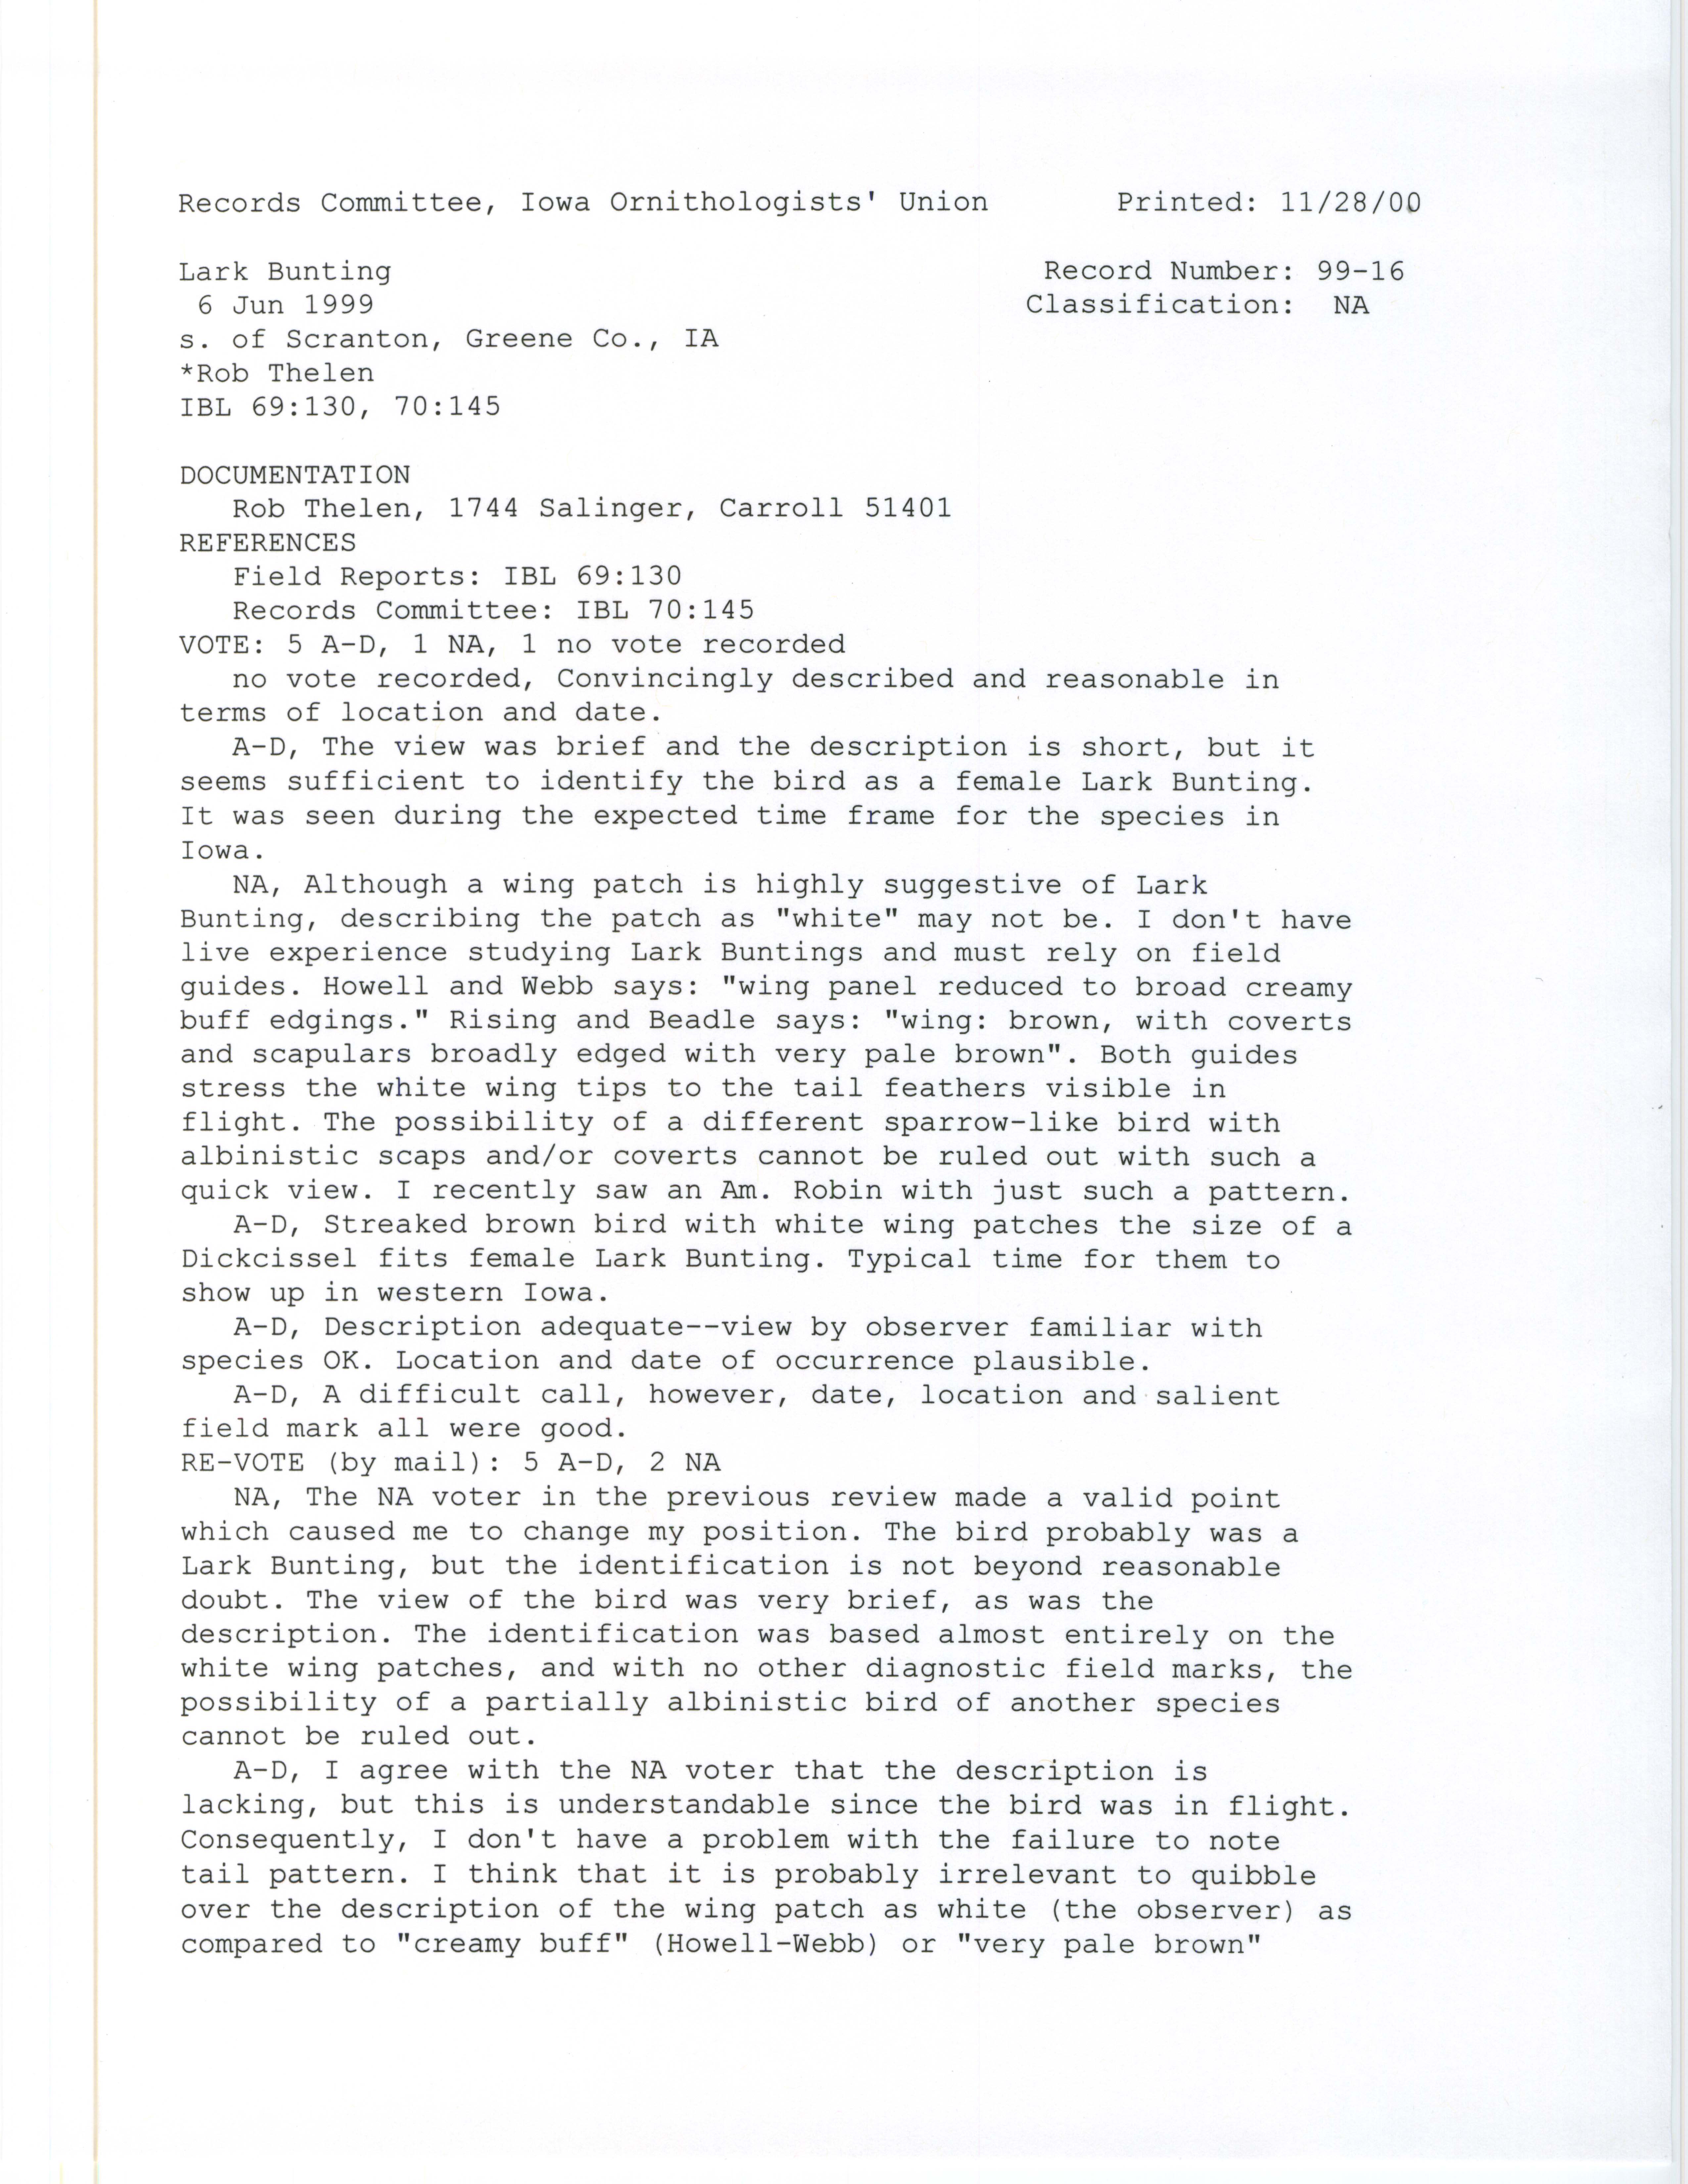 Records Committee review for rare bird sighting for Lark Bunting southeast of Scranton, 1999